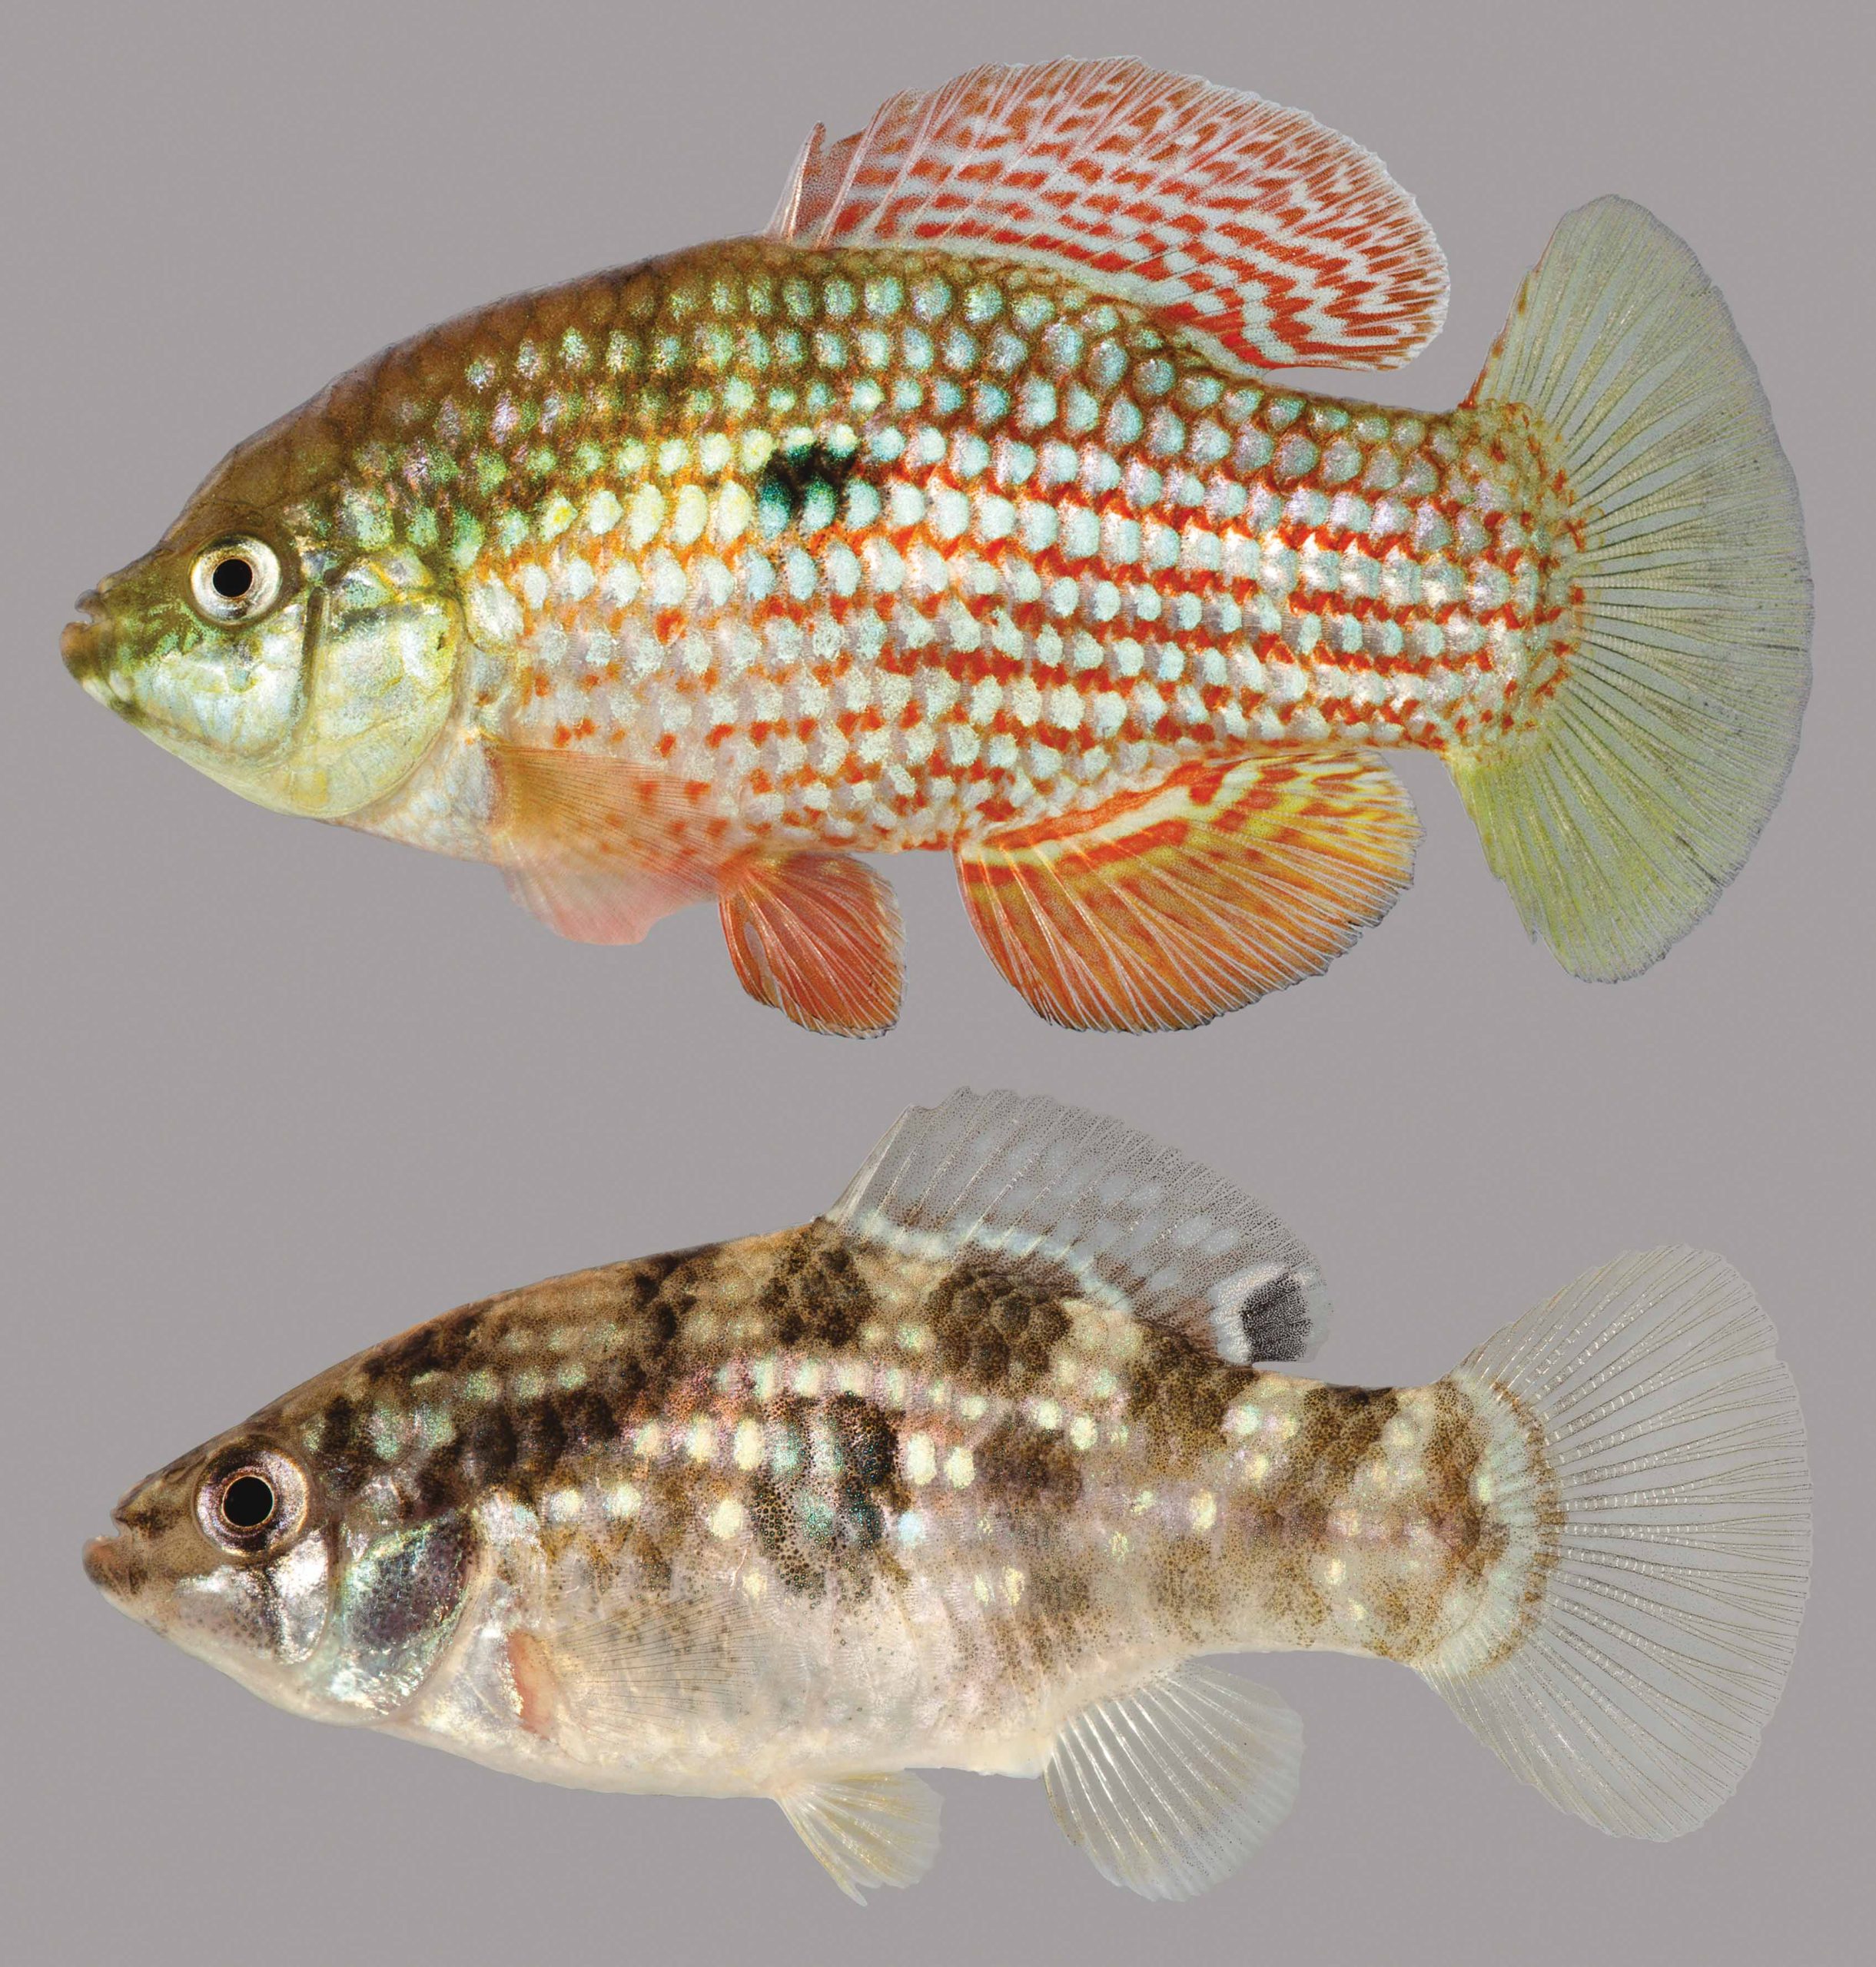 Lateral view of two flagfish